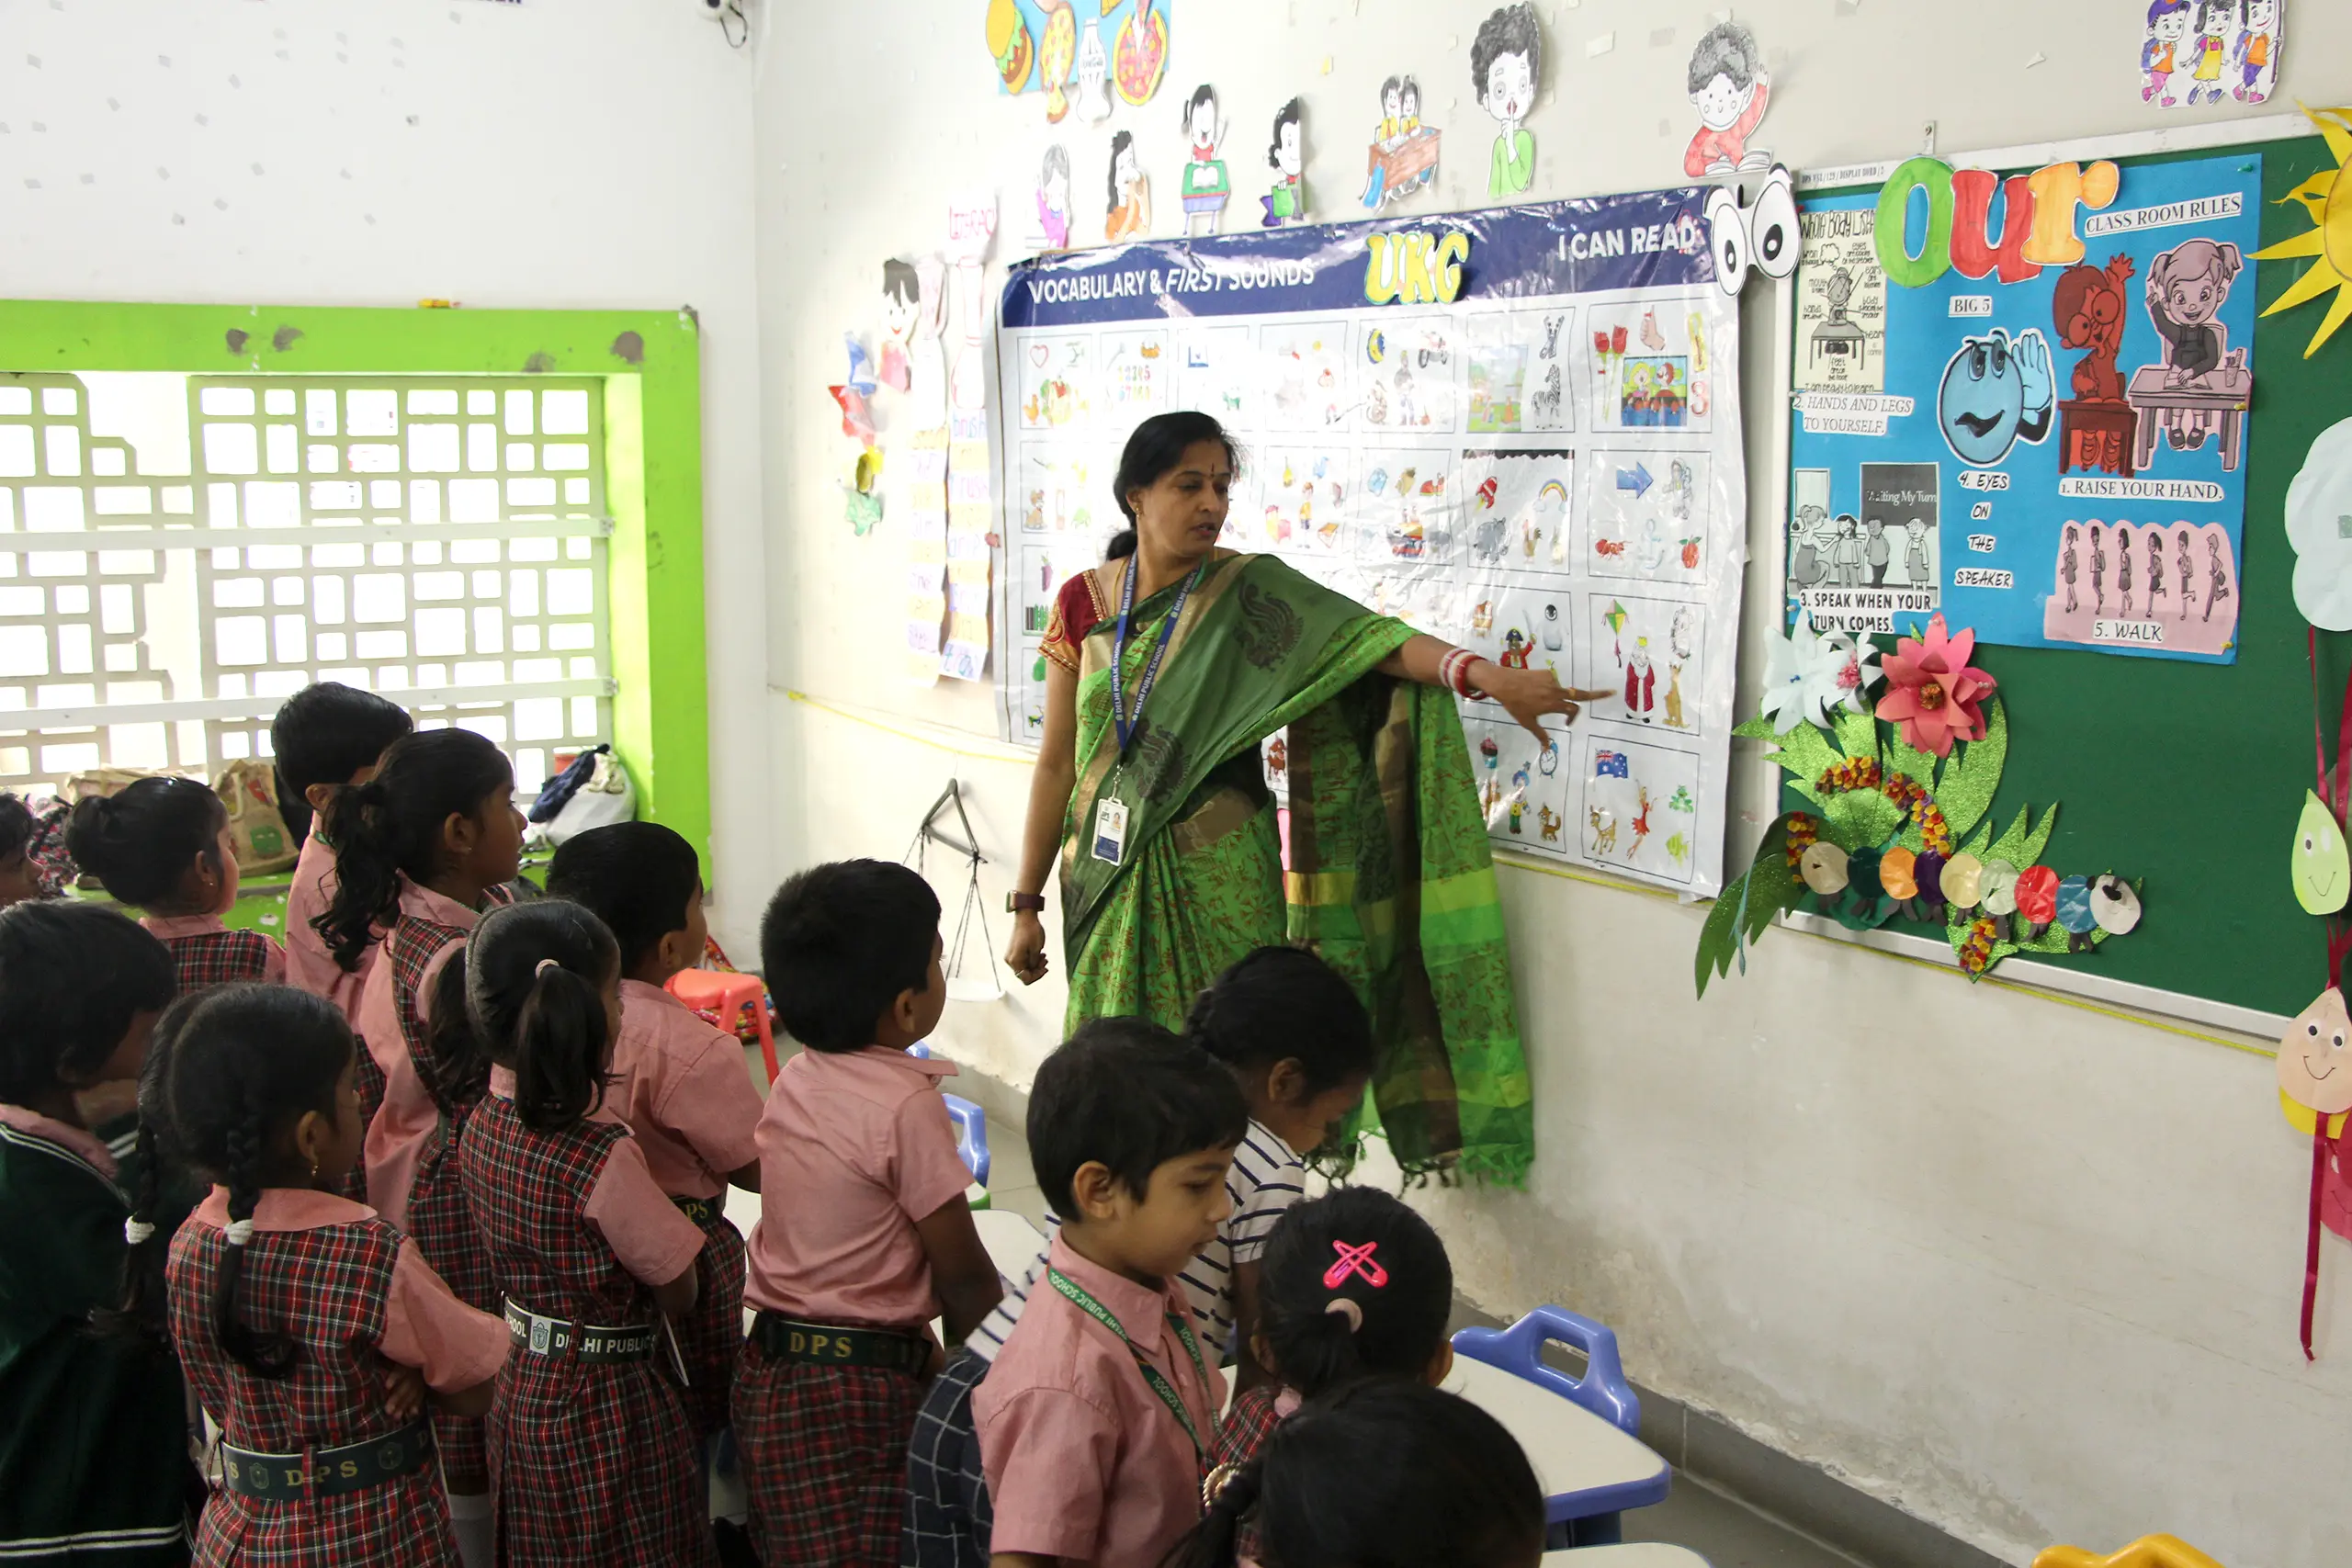 Teacher teaching vocabulary to students using charts in the class at DPS Warangal